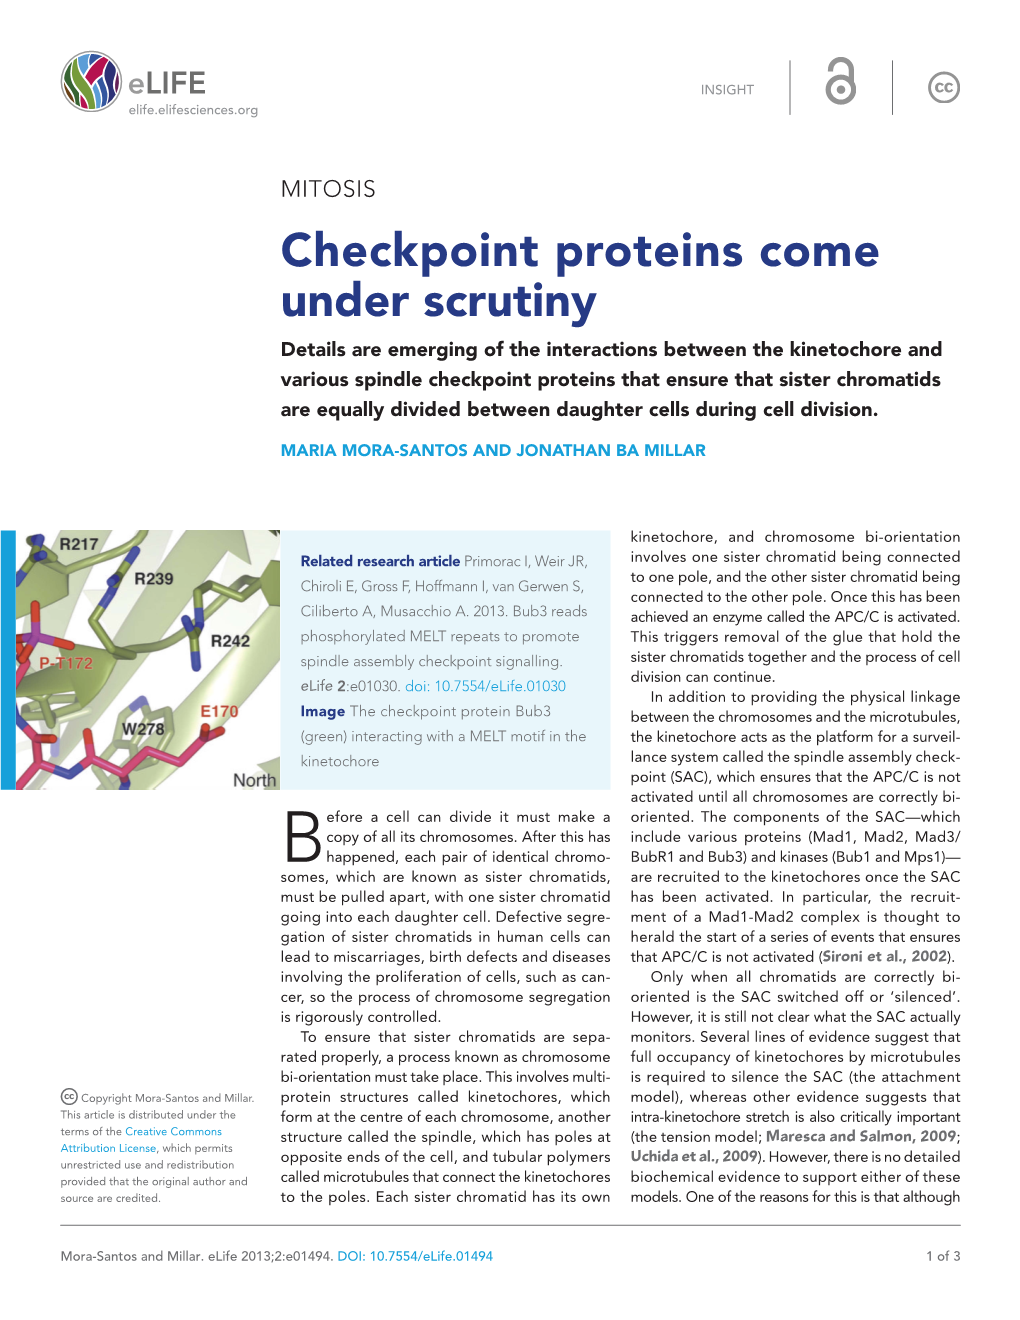 Checkpoint Proteins Come Under Scrutiny